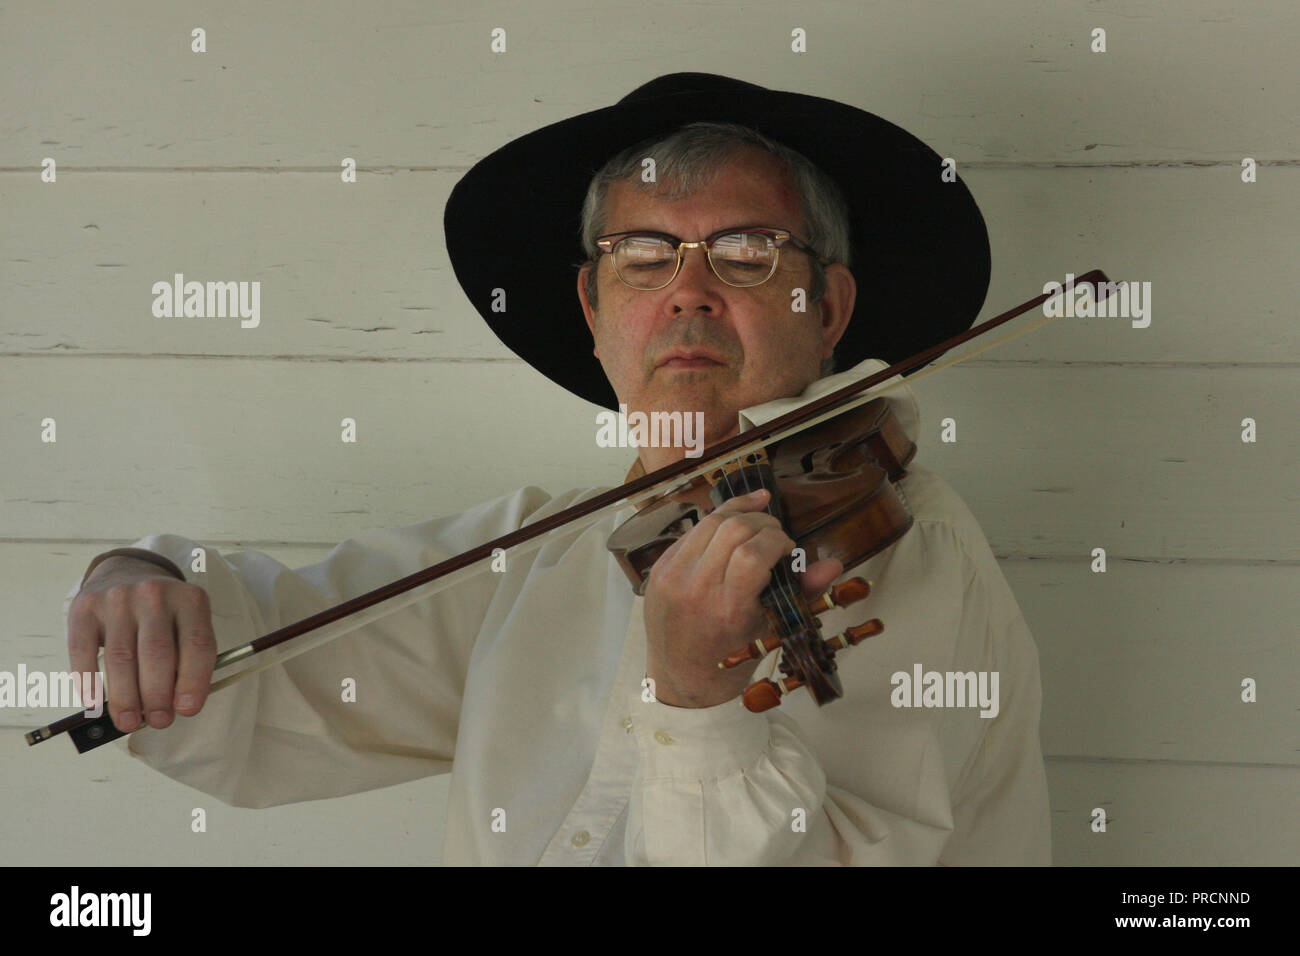 Man playing violin dressed in old traditional American (colonial) clothing Stock Photo